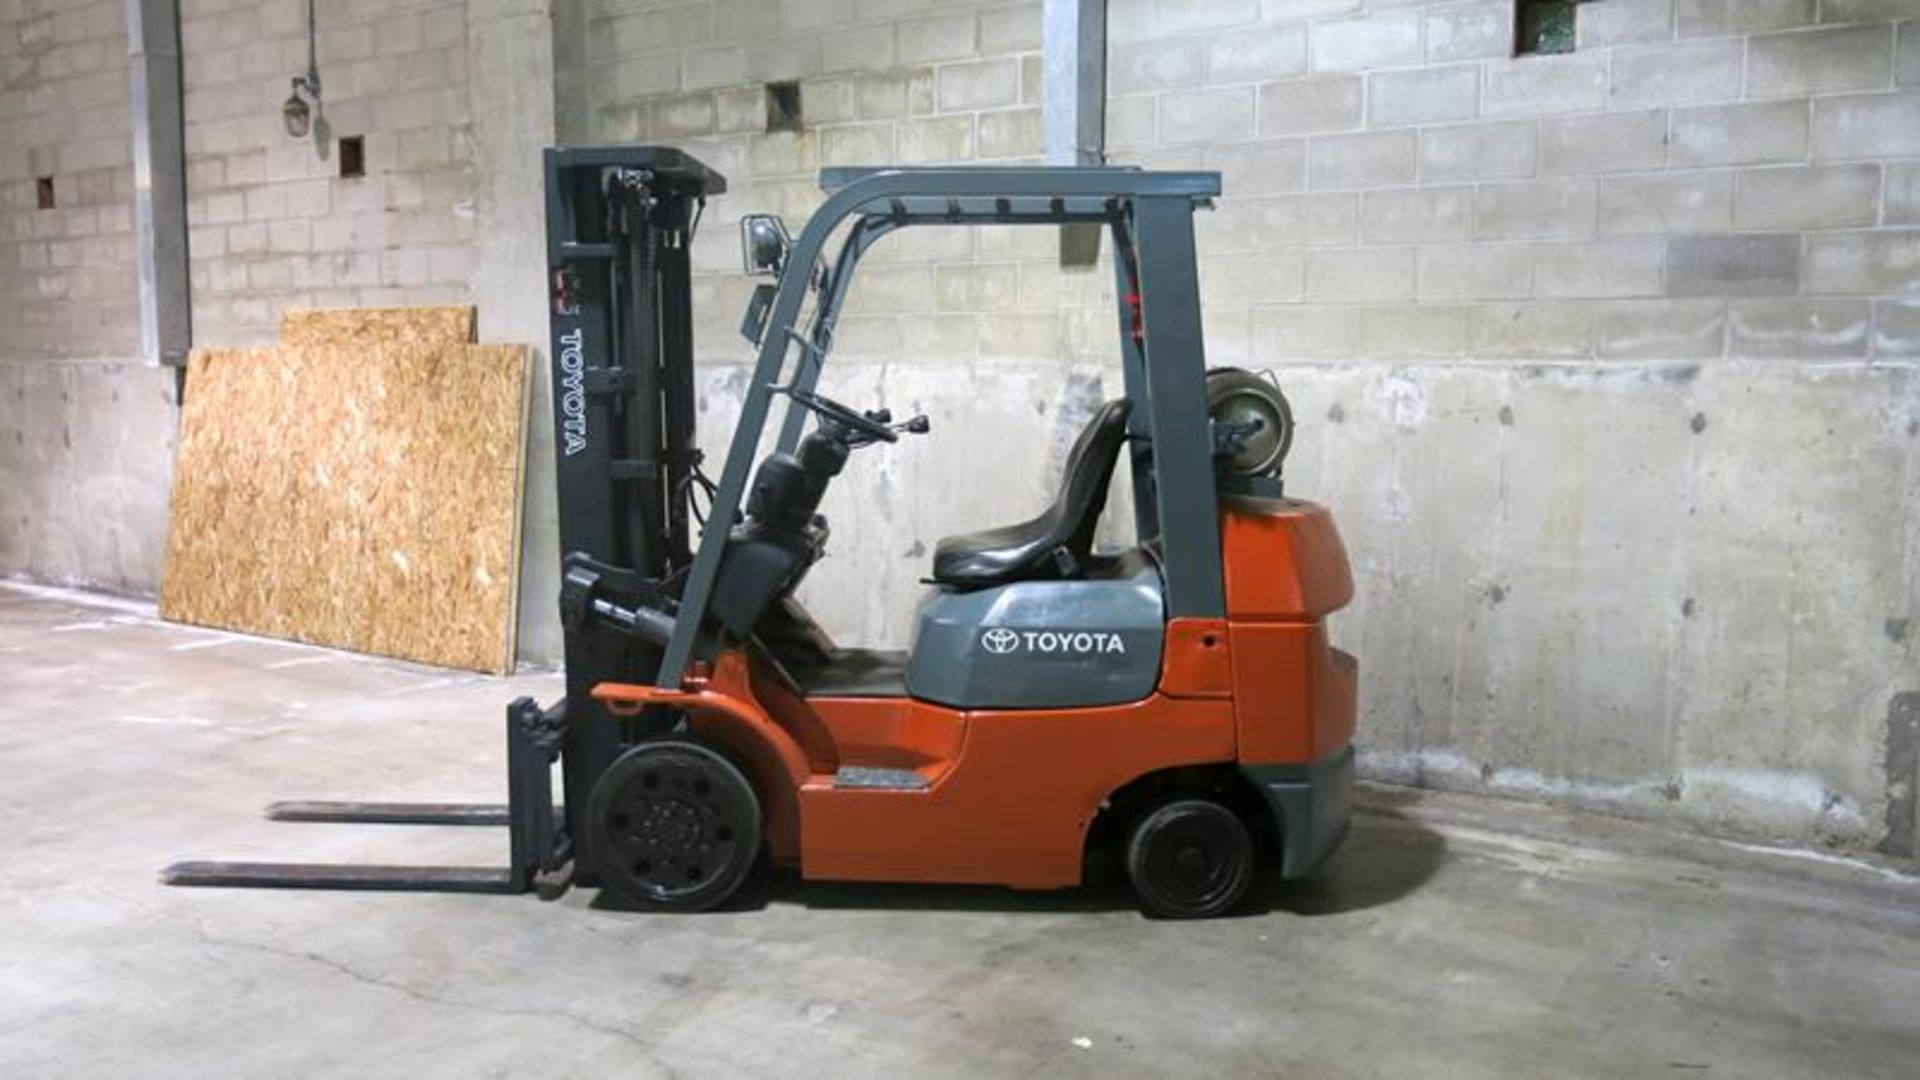 TOYOTA, 7FGCU25, 4,500 LBS, 3 STAGE, LPG FORKLIFT WITH SIDE SHIFT, 189" MAXIMUM LIFT, S/N 80139 - Image 6 of 8